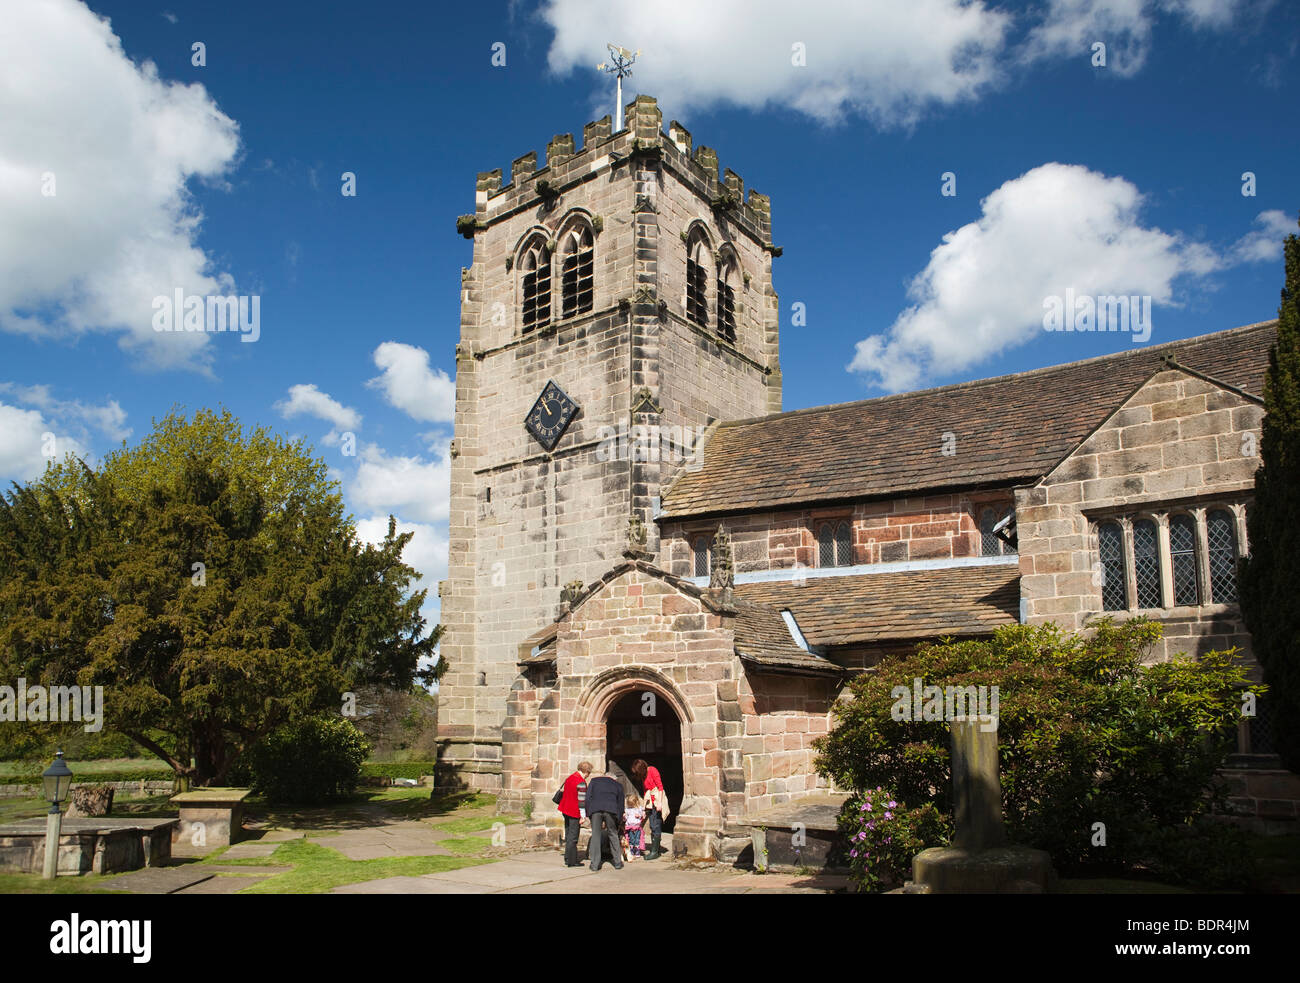 UK, England, Cheshire, Nether Alderley, St Mary’s Church, parishioners arriving for a service Stock Photo